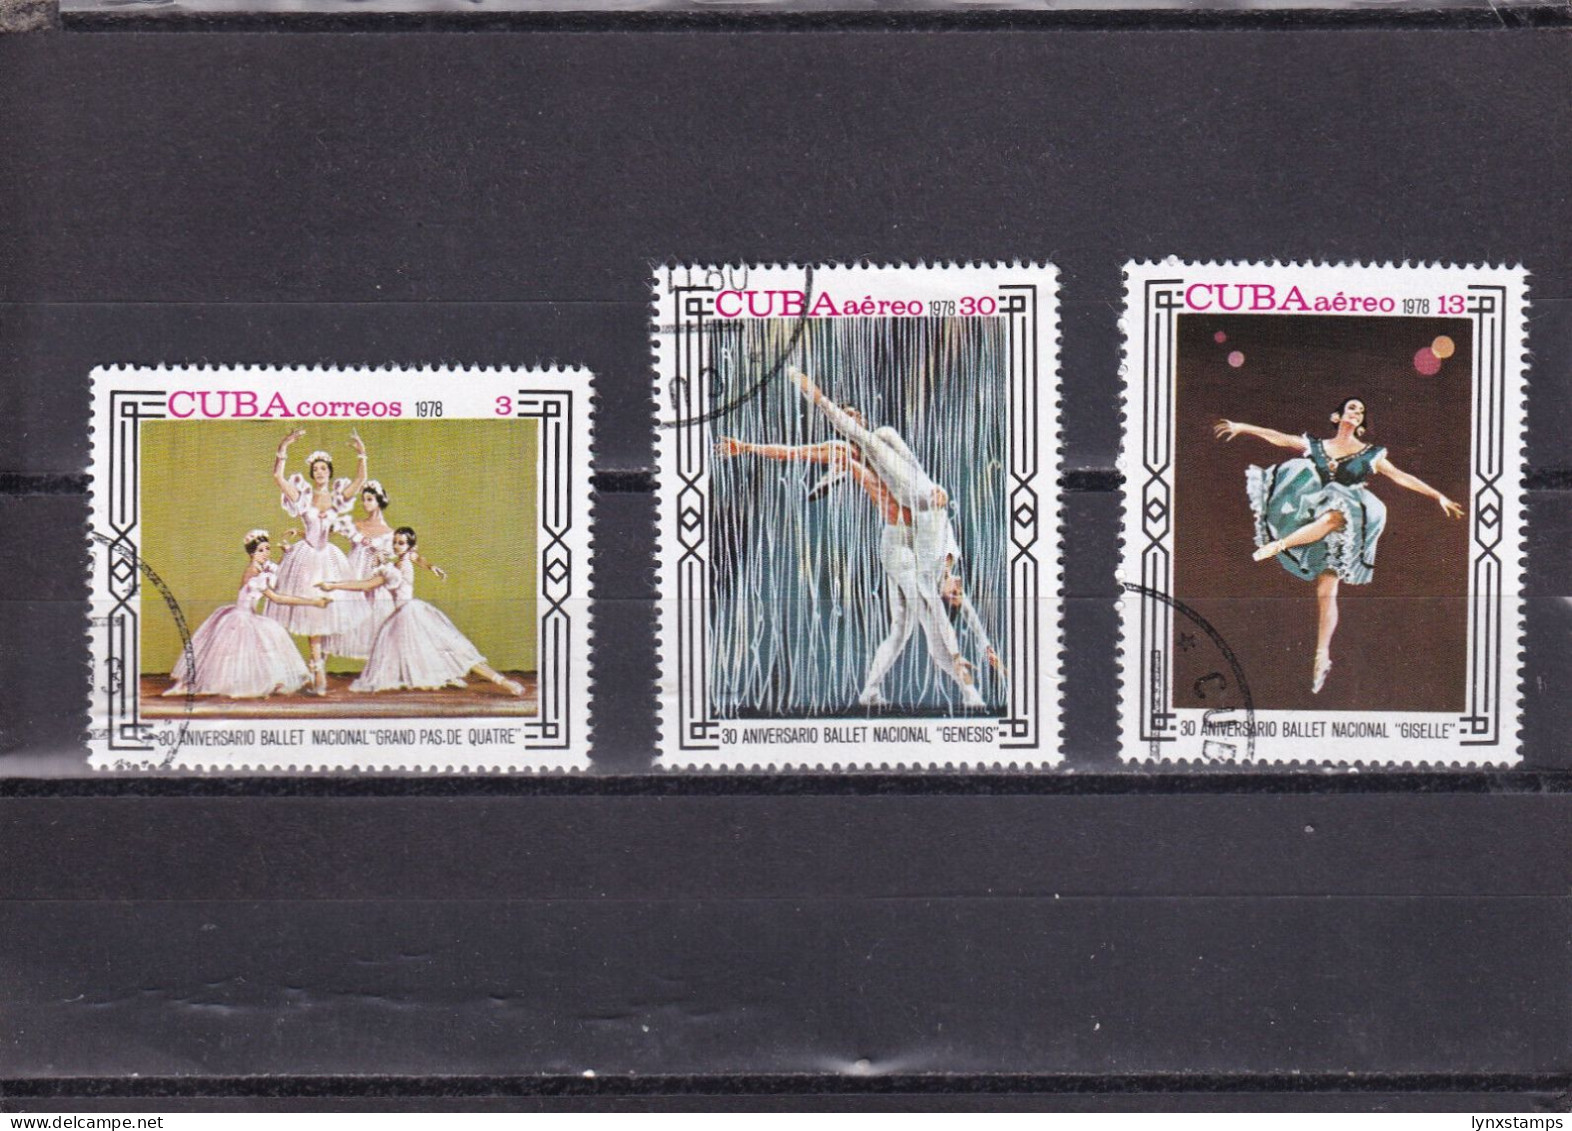 LI03 SCuba 1978 The 30th Anniversary Of The National Ballet Company Used Stamps - Used Stamps